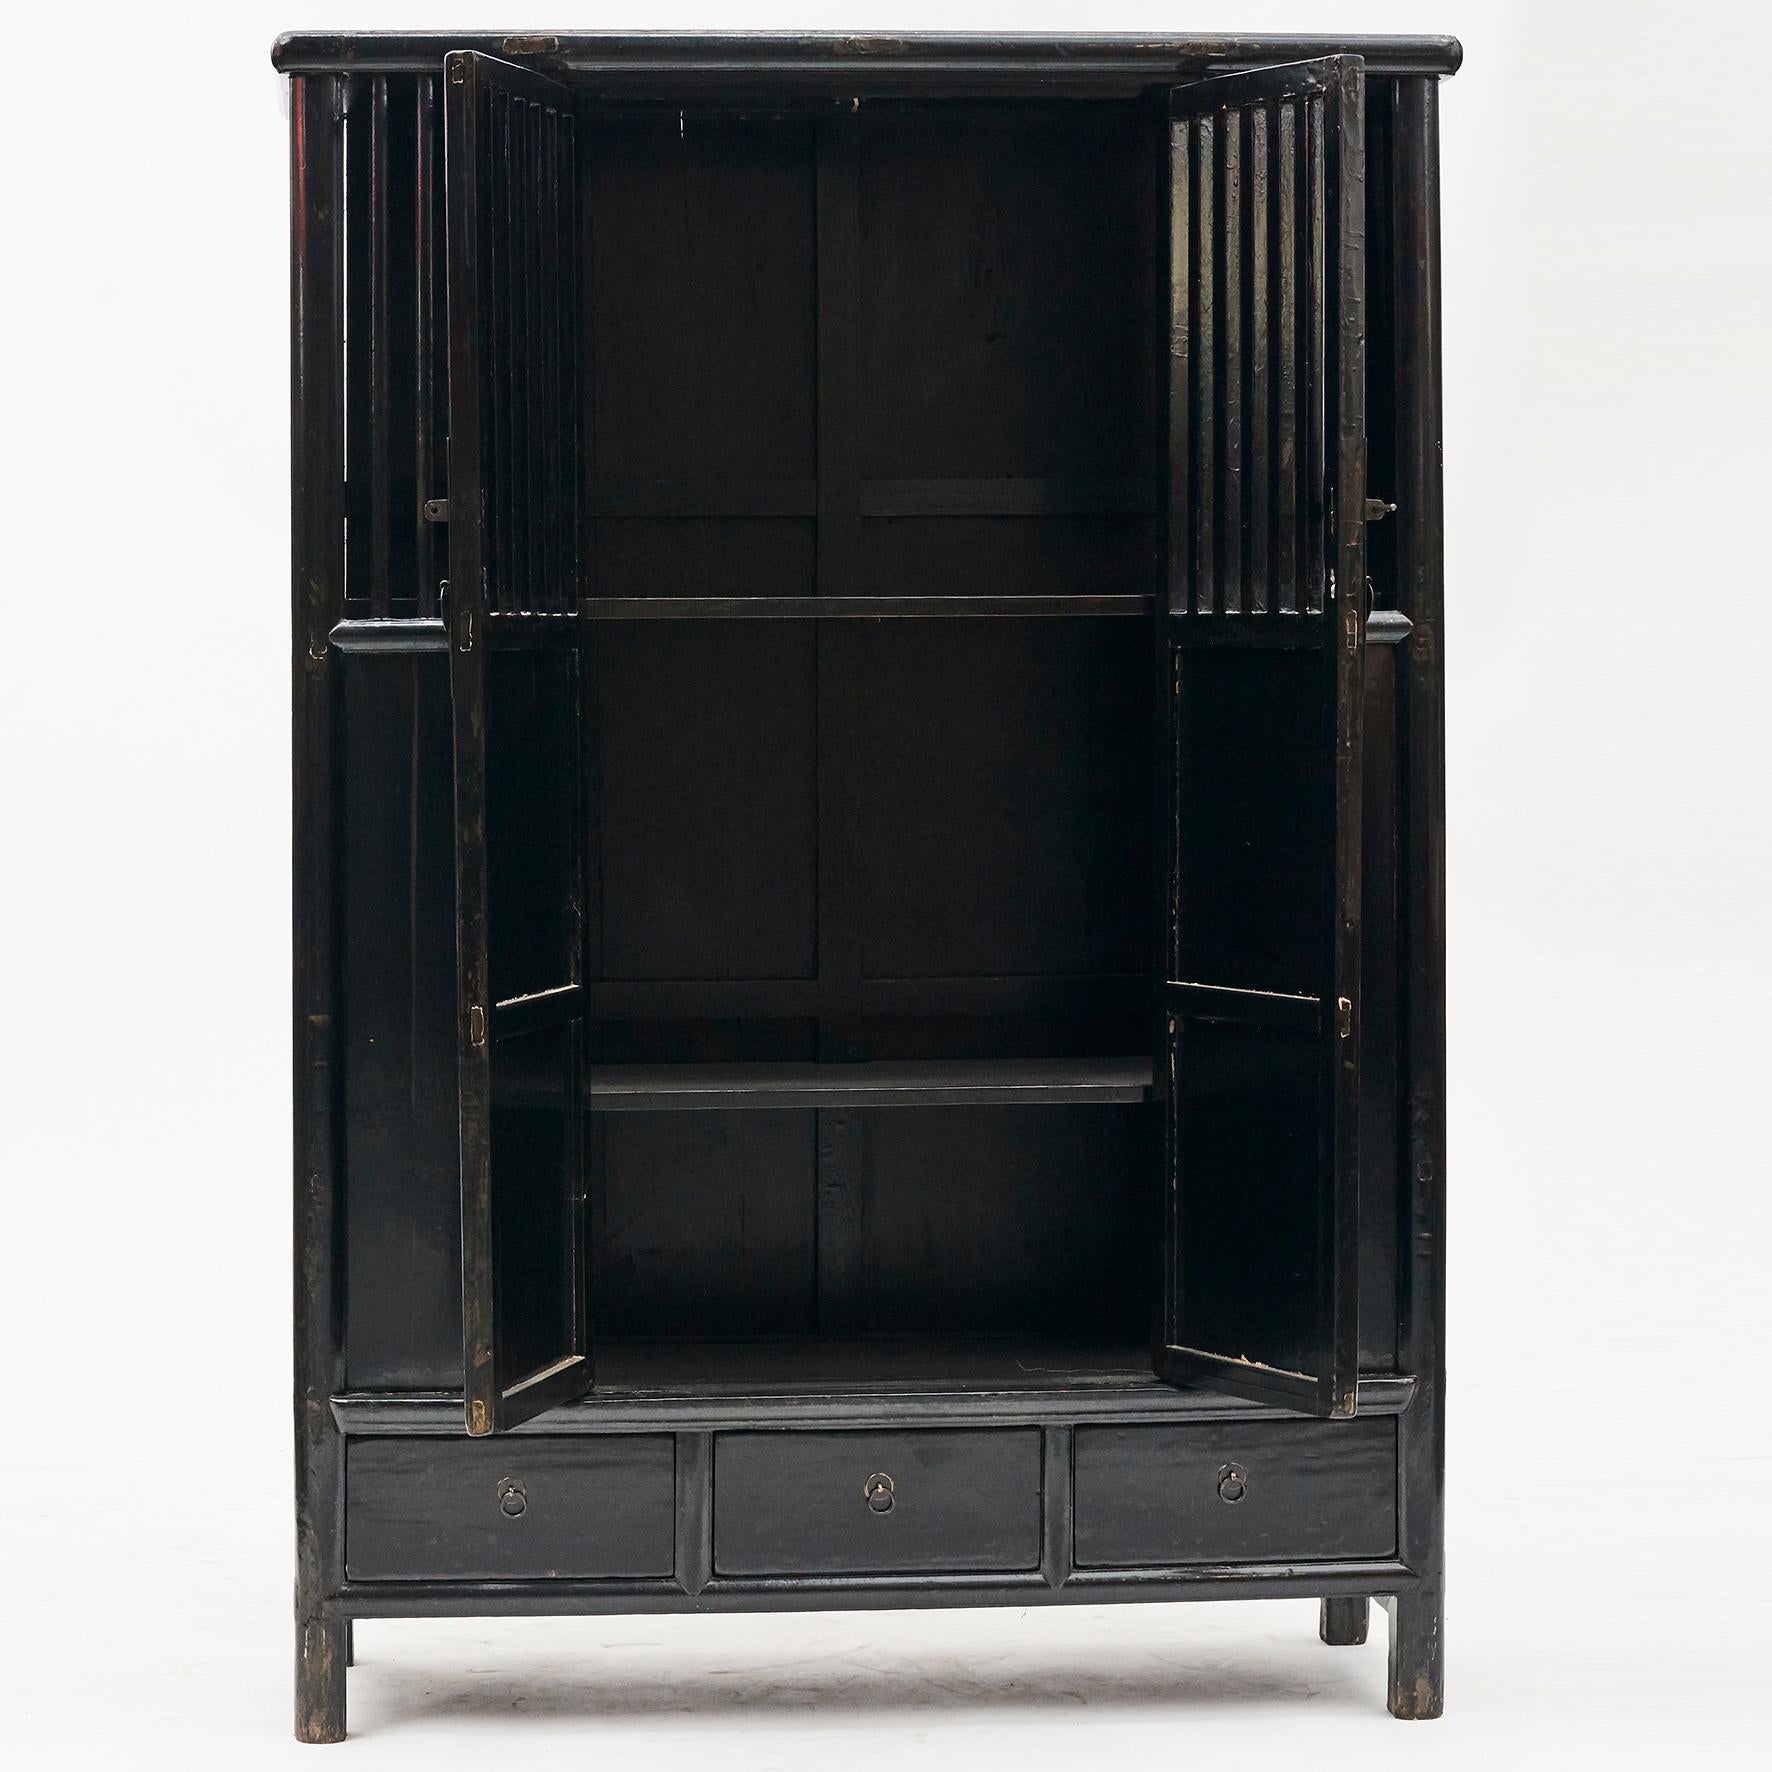 2 door lattice door cabinet from Jiangsu, China, circa 1820-1830.
Pair of doors. The inside has a large three shelf storage area and three drawers at the bottom fitted with brass drawer pulls.
Original condition and black lacquer with natural